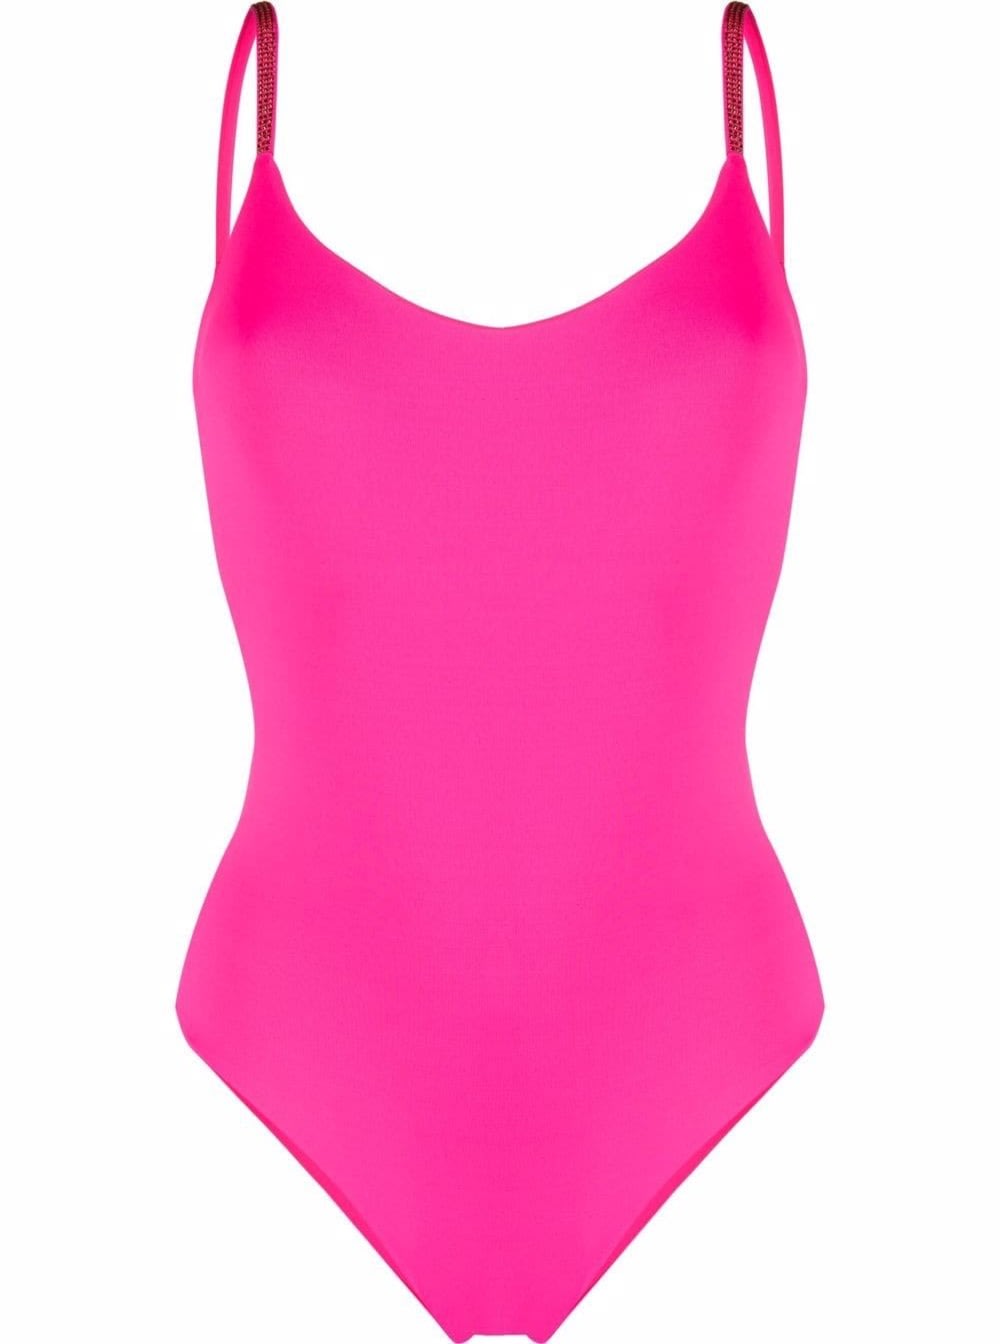 Fisico - Cristina Ferrari Fisico Womans Pink One-piece Stretch Fabric Swimsuit With Rinestones Applications